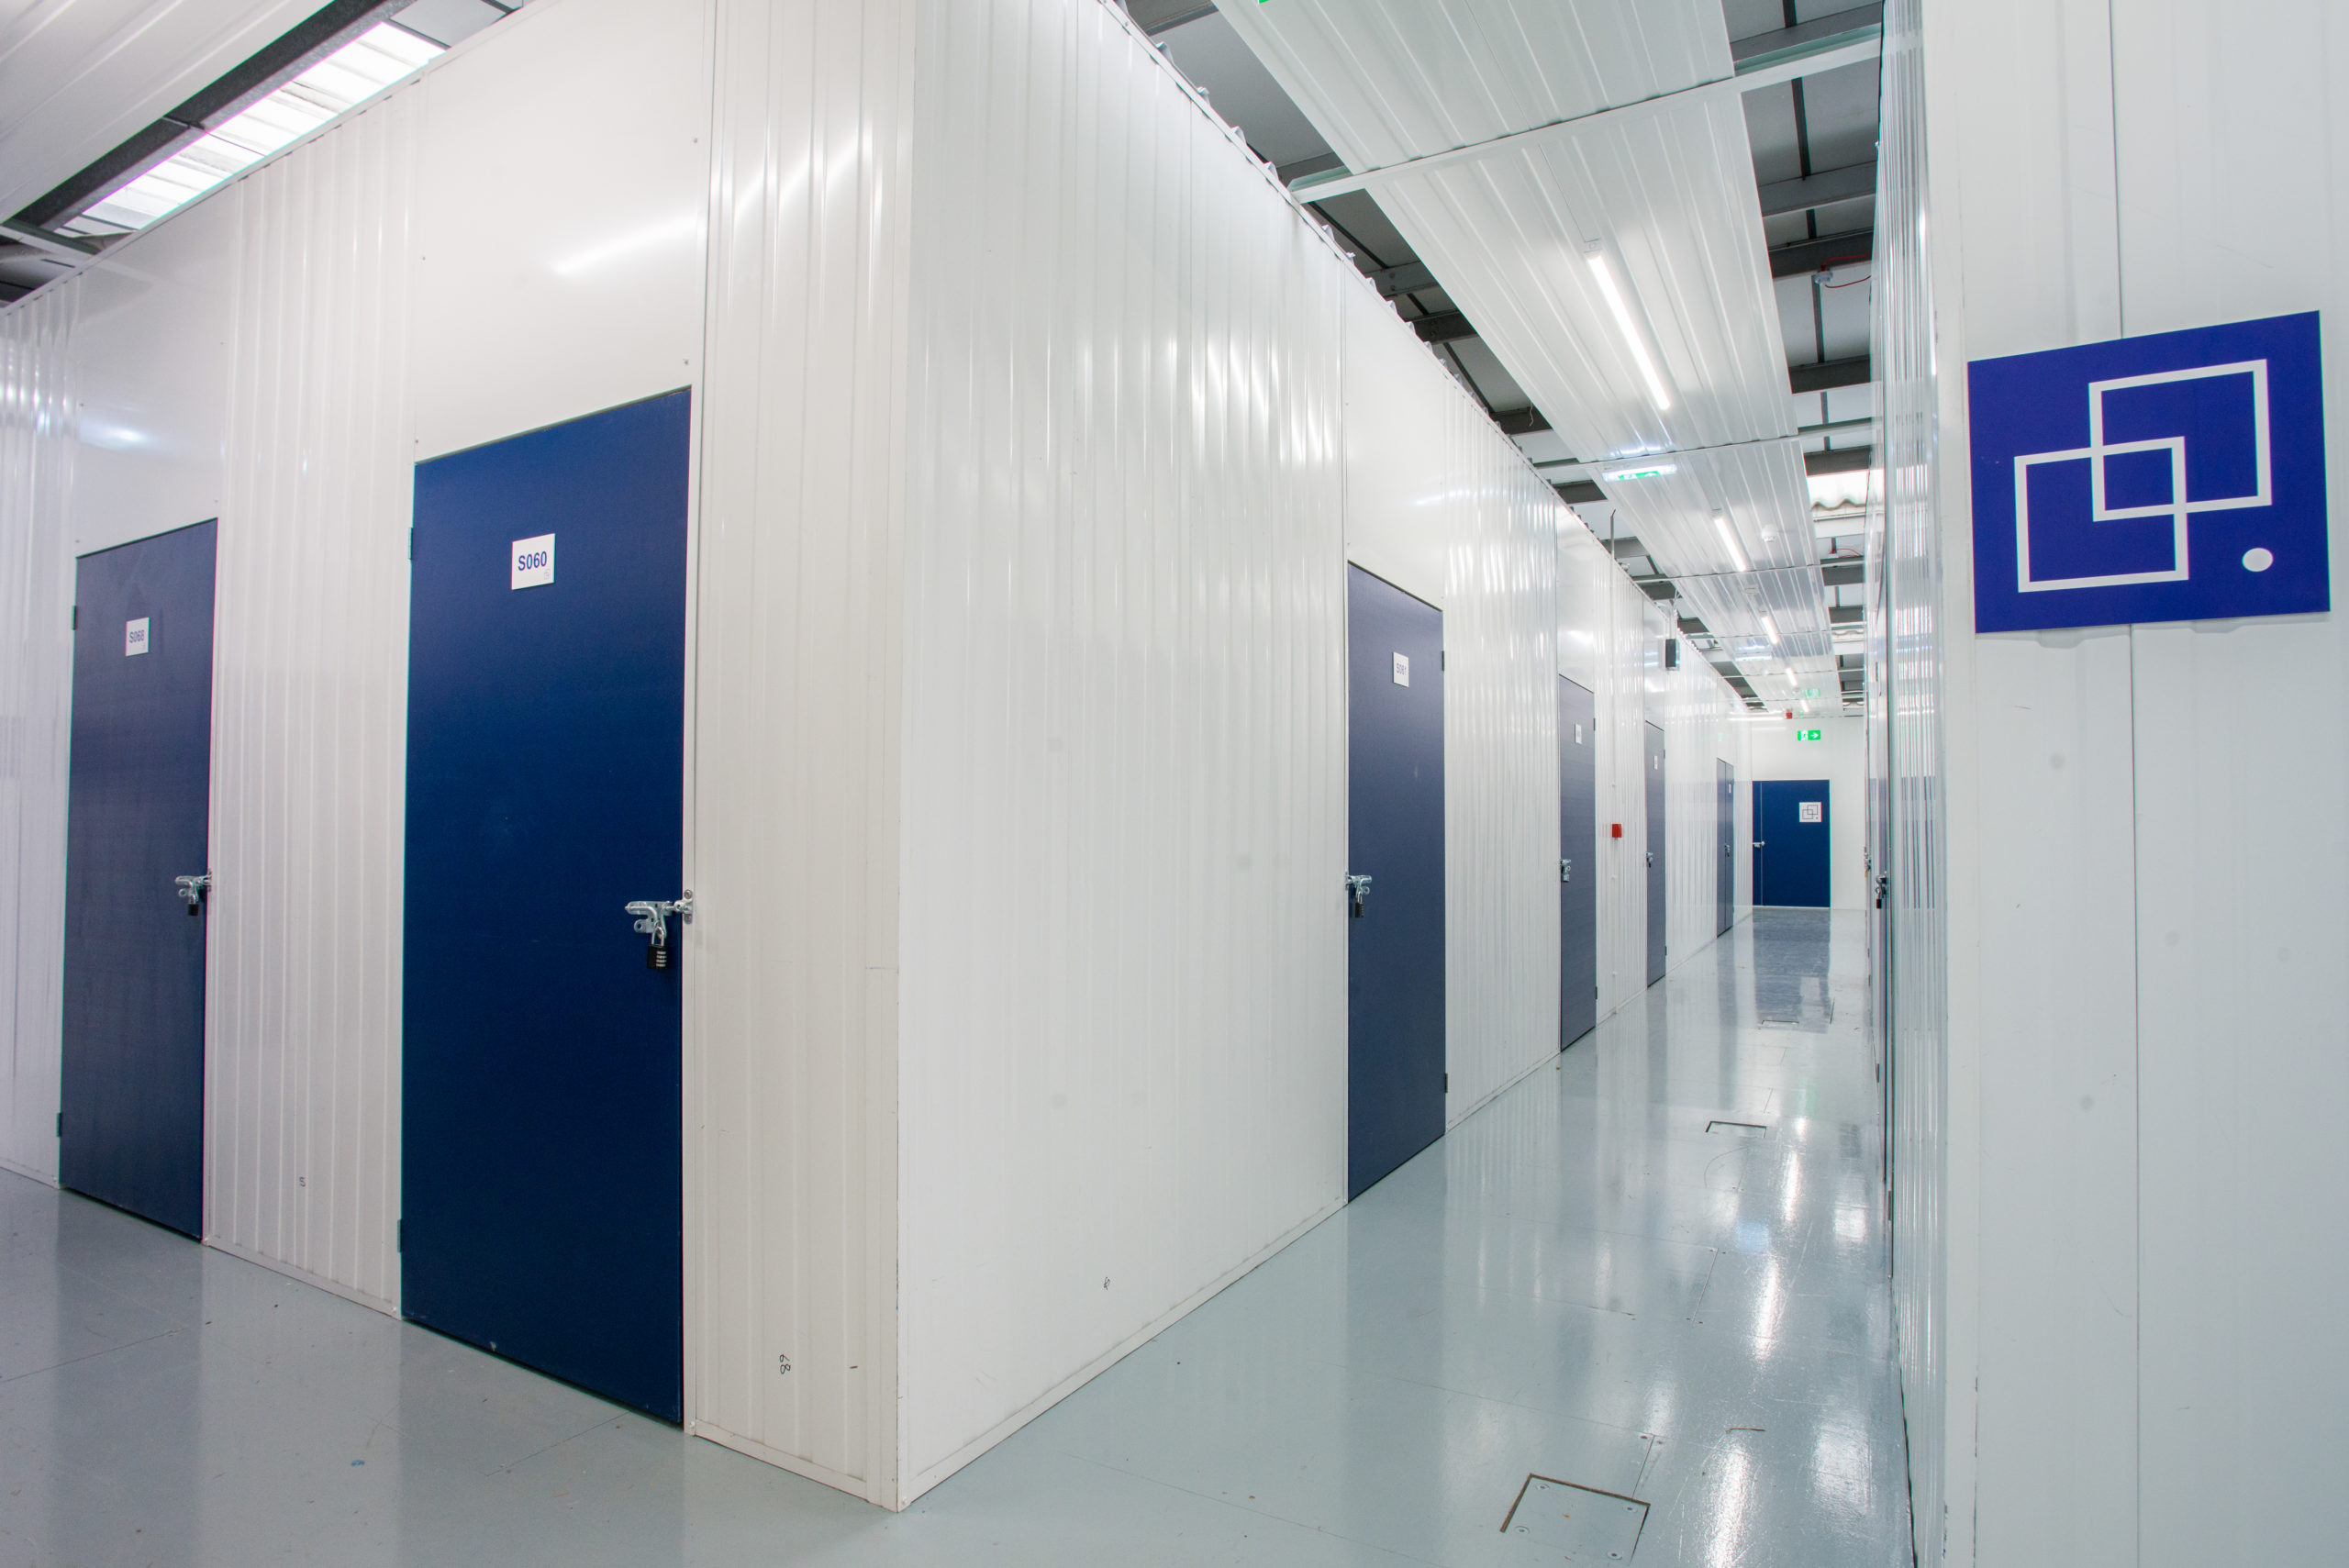 Cinch Self Storage Bicester - By Aimee Kirkham, Oxford-Photography